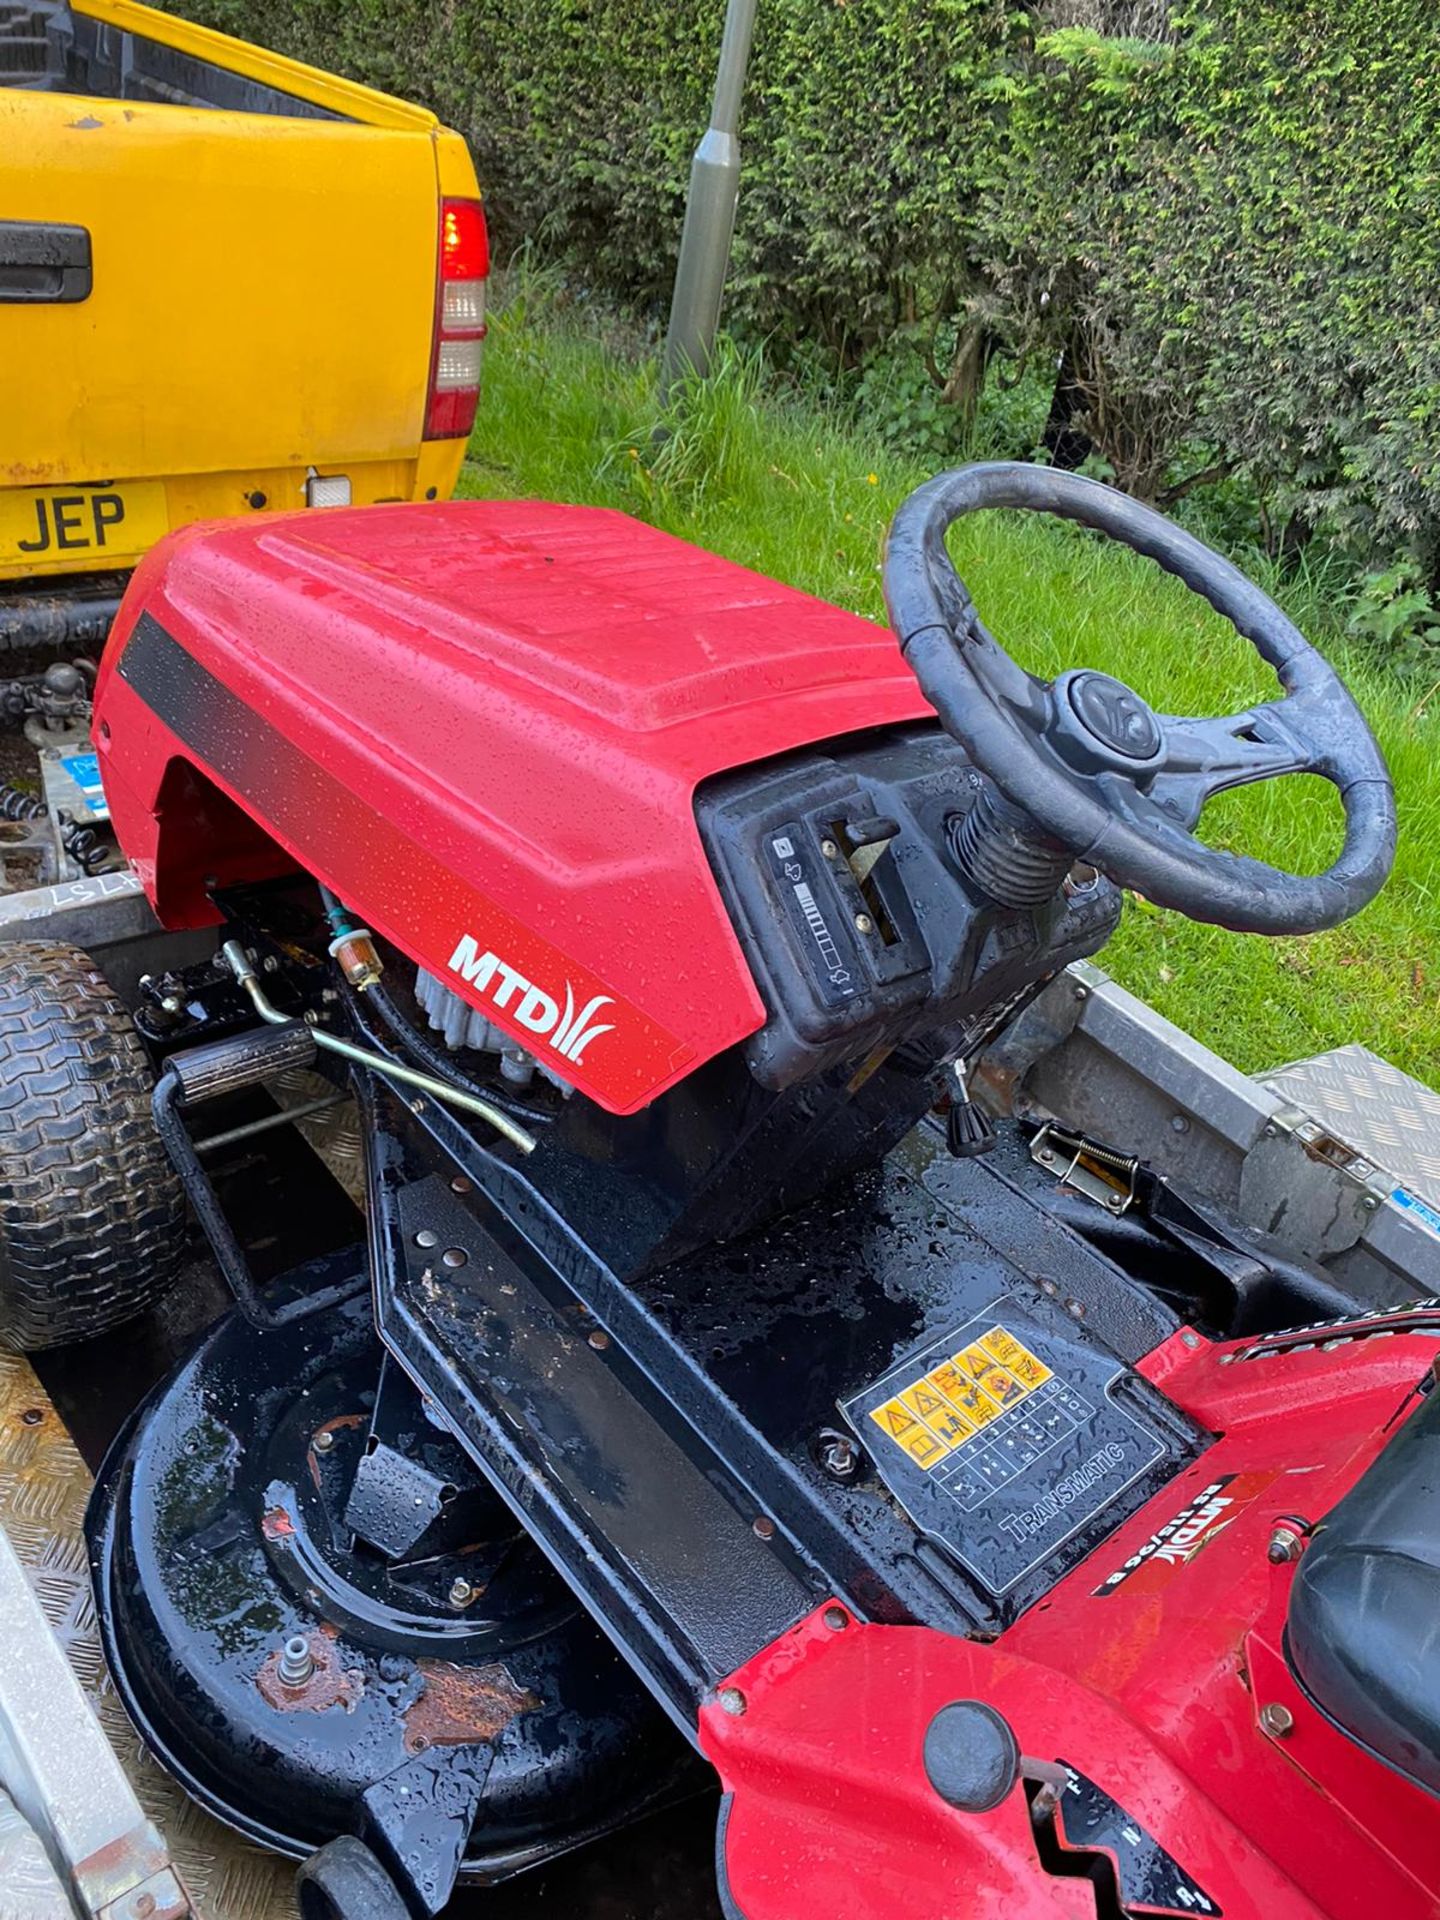 SINGLE AXLE PLANT TRAILER COMES WITH MTD RIDE ON LAWN MOWER, RUNS DRIVES AND CUTS *NO VAT* - Image 7 of 8